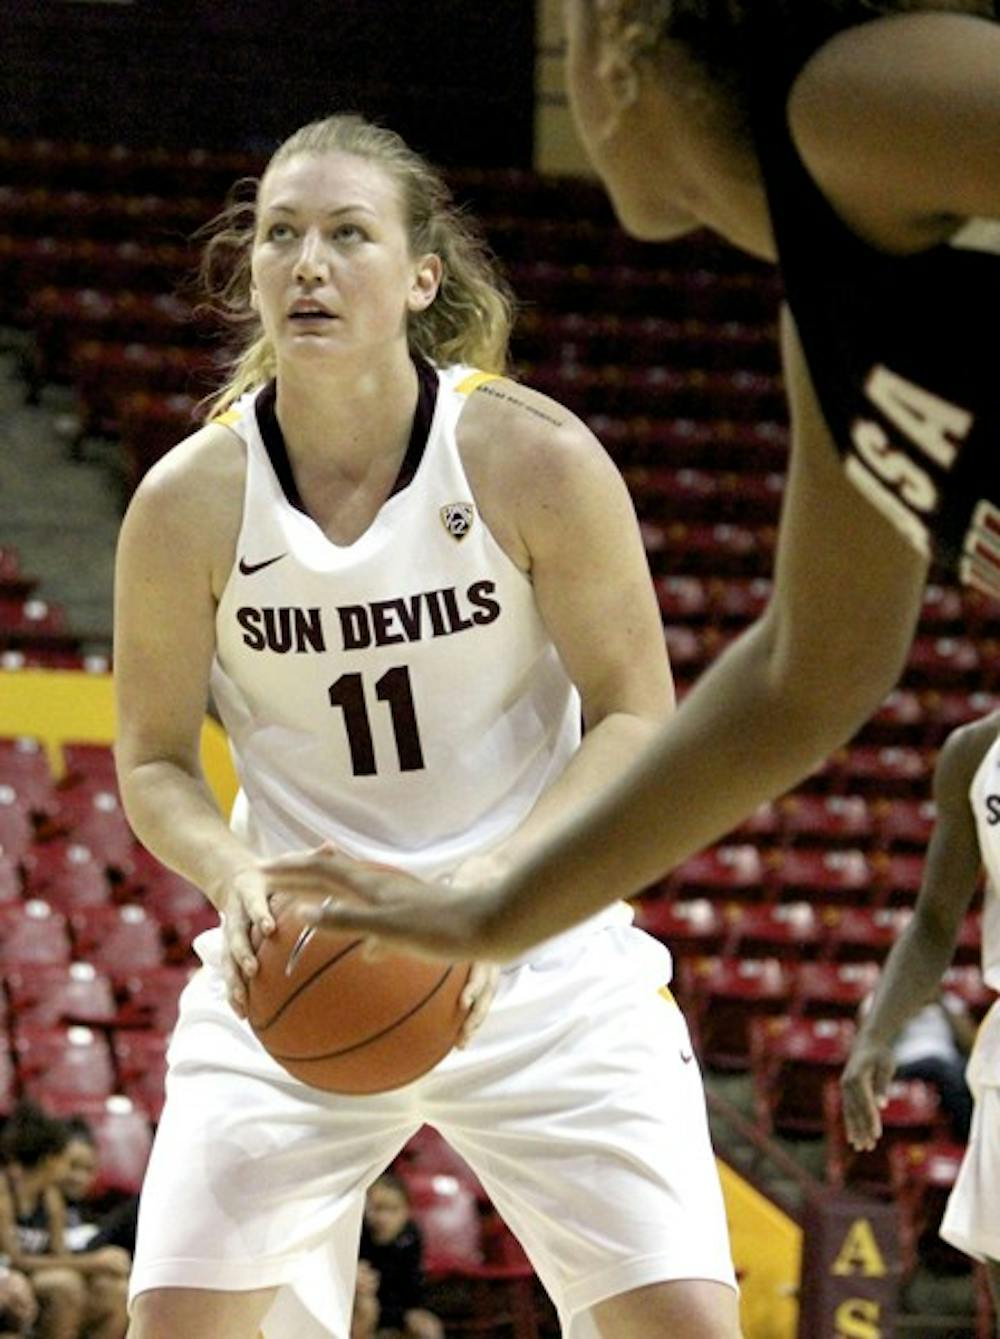 ASU forward/center Kali Bennett concentrates for a free throw during the Sun Devils’ 66-35 exhibition win over Azusa Pacific on Nov. 3. The Sun Devils defeated Illinois on a game-winning layup on Thursday, but lost to Rutgers on Friday for their first loss of the season. (Photo by Sam Rosenbaum)